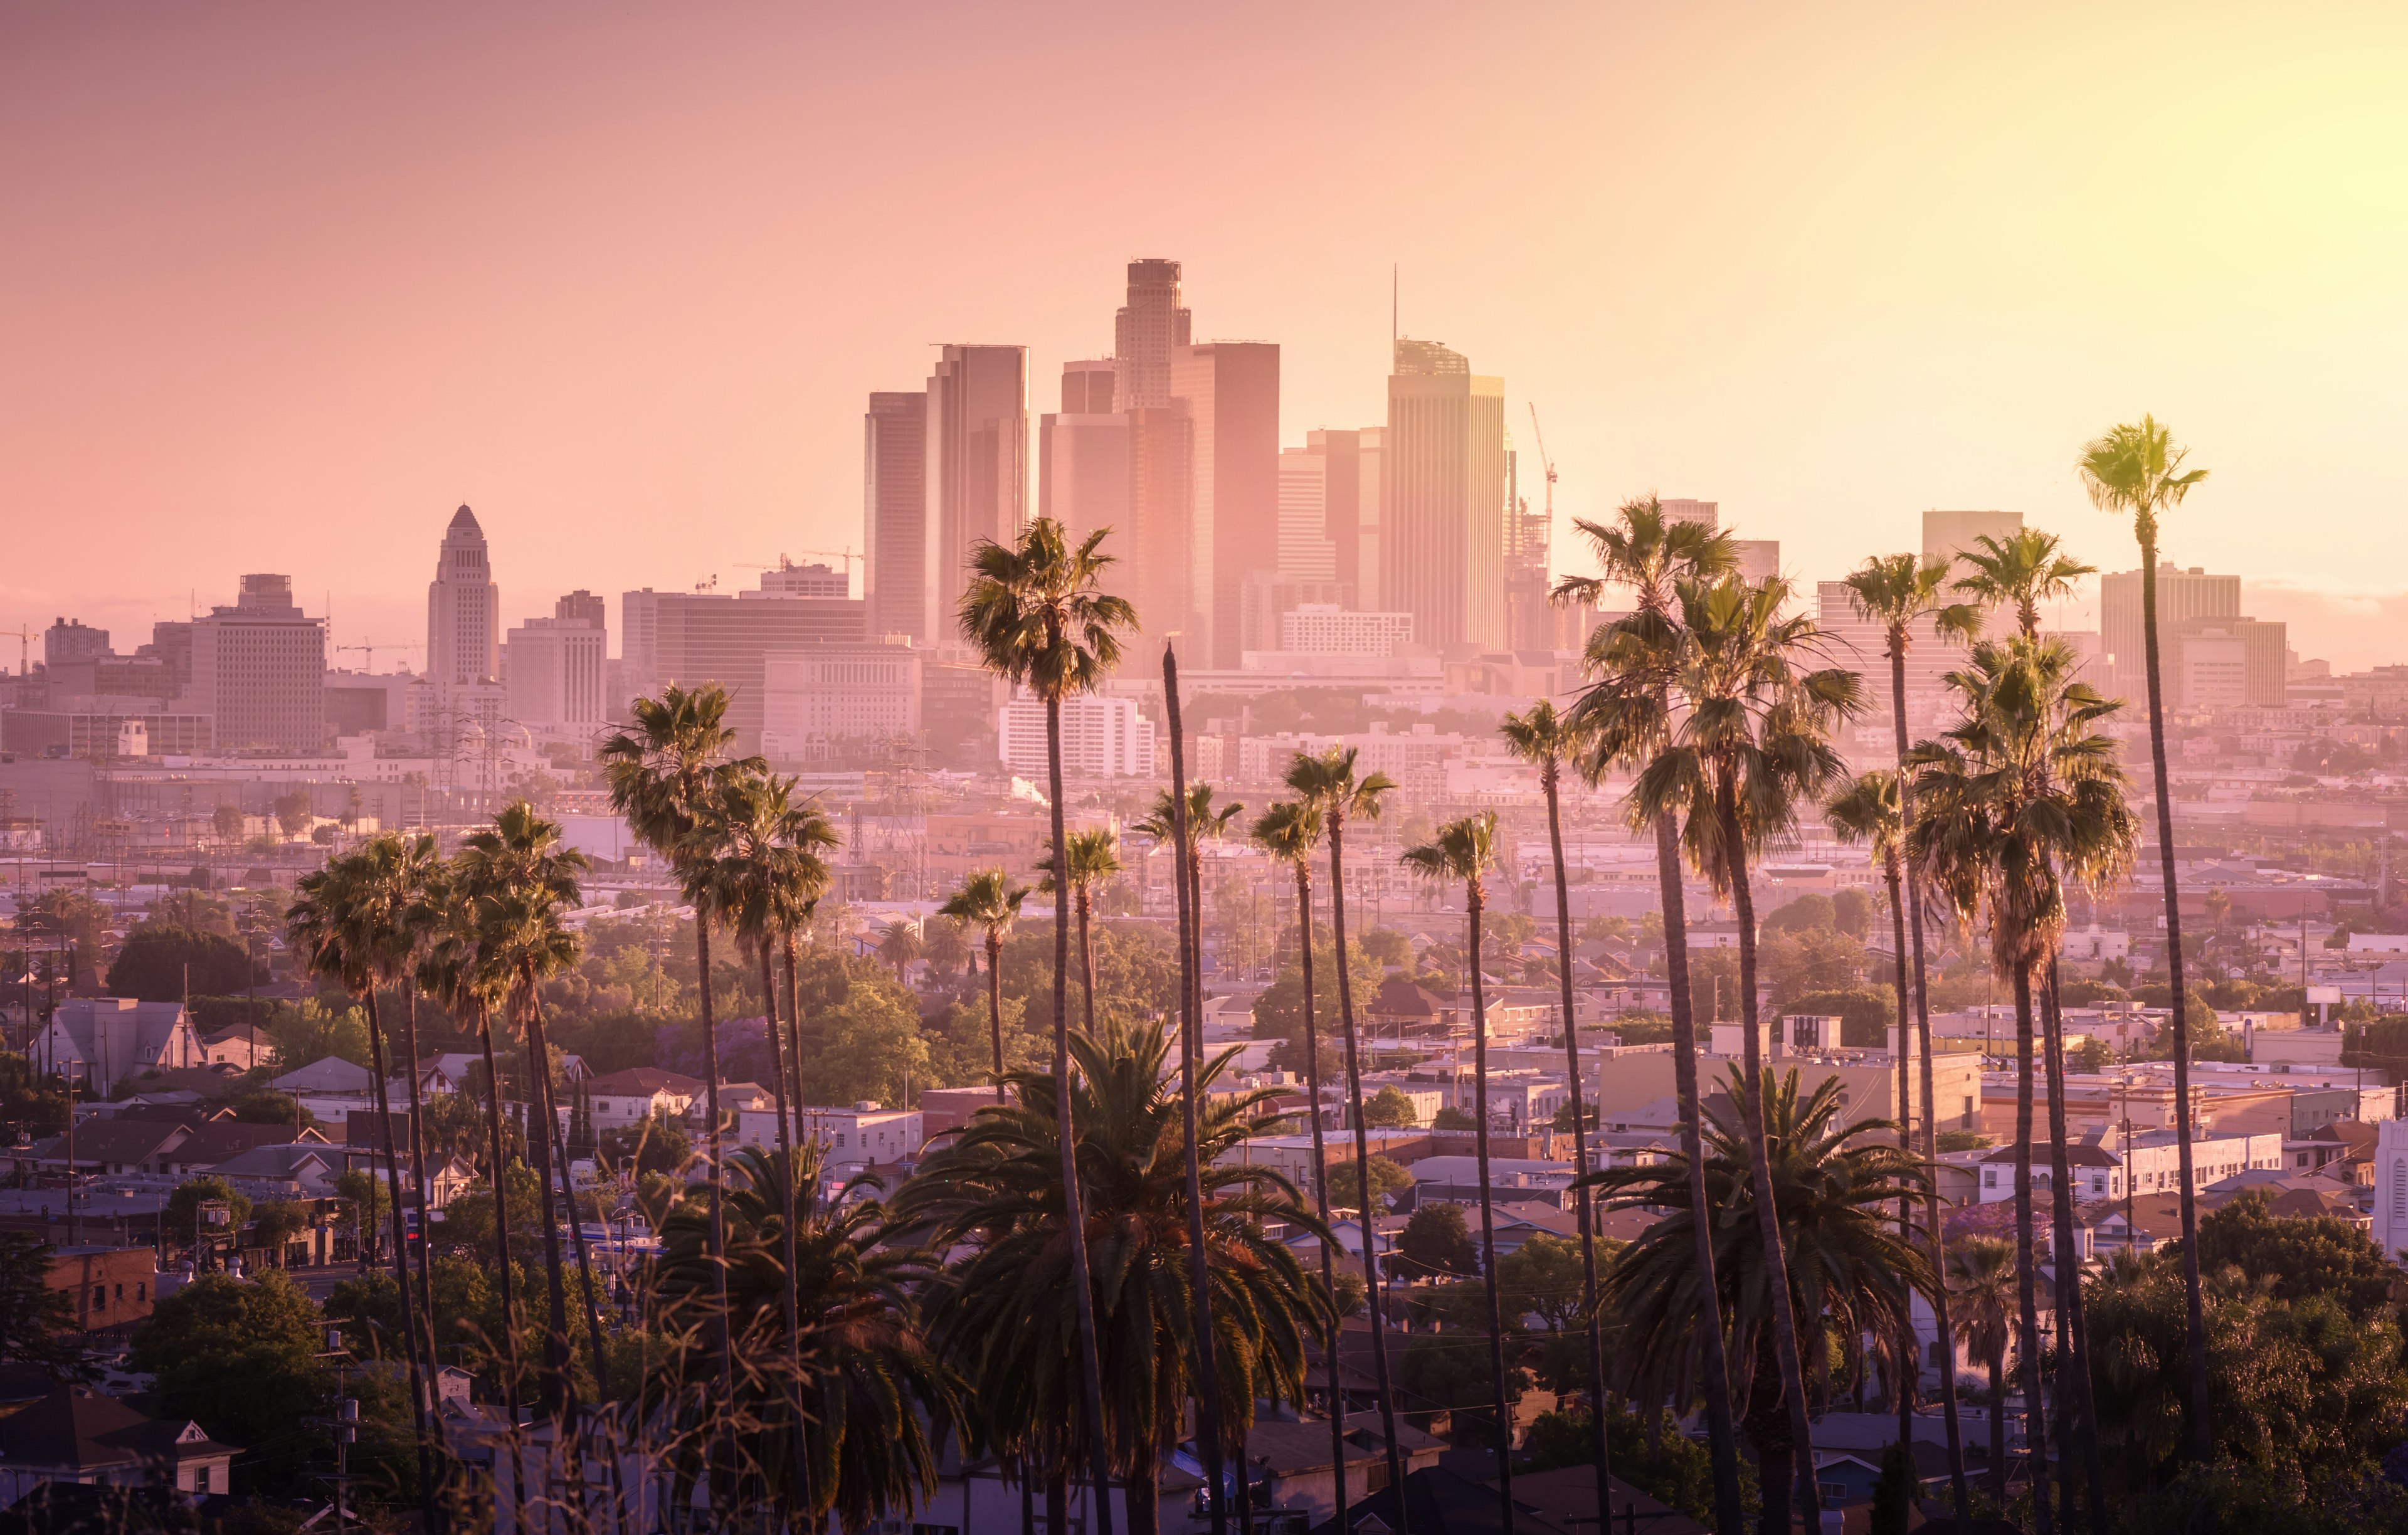 Sunset over downtown Los Angeles with palm trees in the foreground.